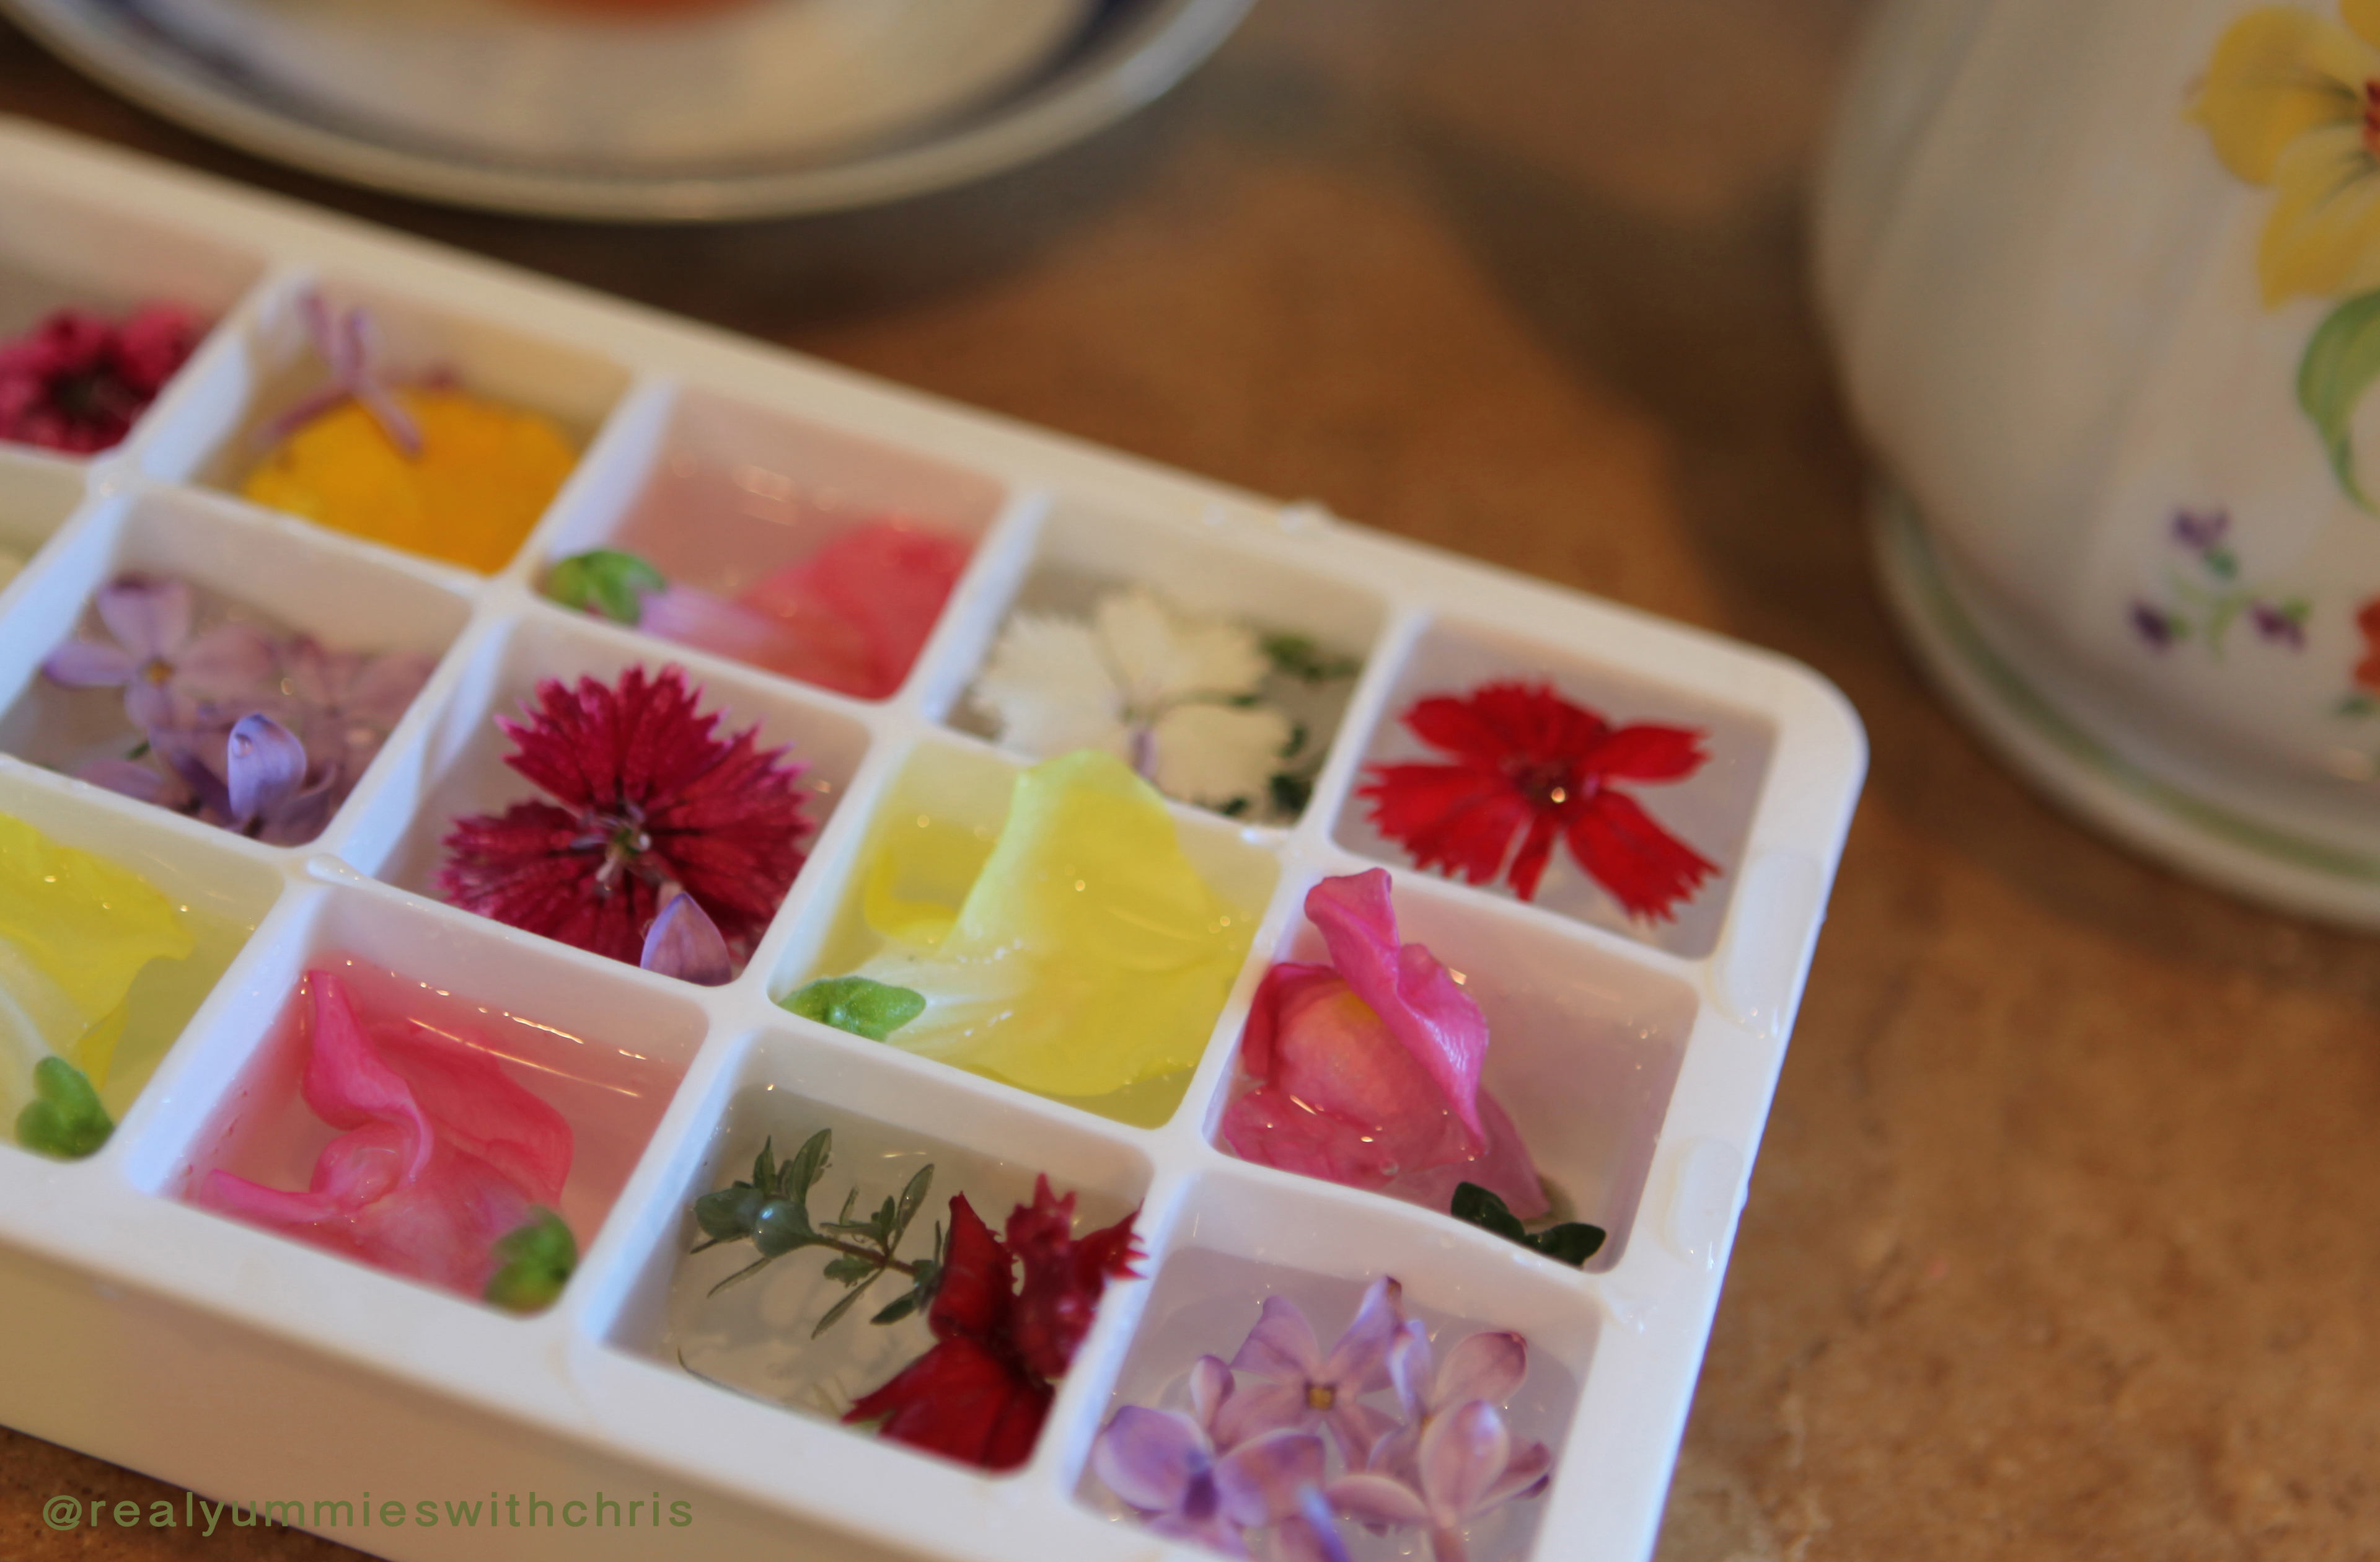 Make the most out of your tea and try edible flower ice combined with